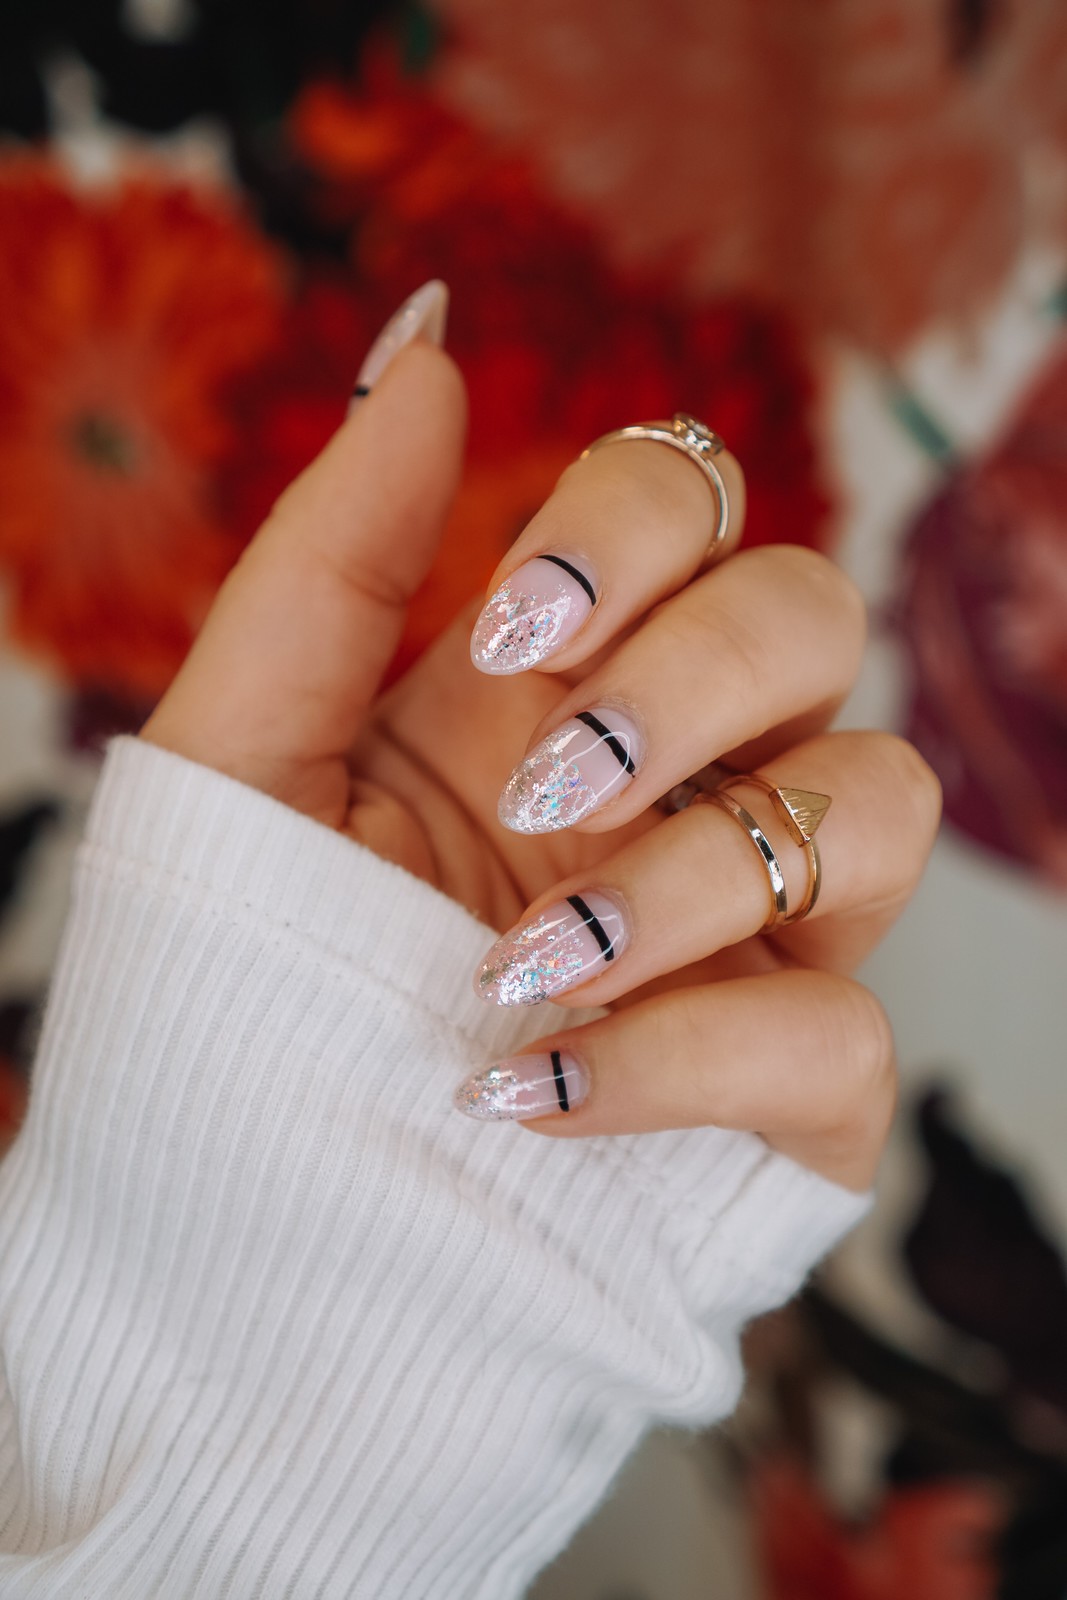 Manicure of the Month: Silver Foil Nails | New Years Eve Manicure Ideas | Edgy Nail Art | Minimal Nail Design | Fall Nails | Autumn Nails Acrylic 